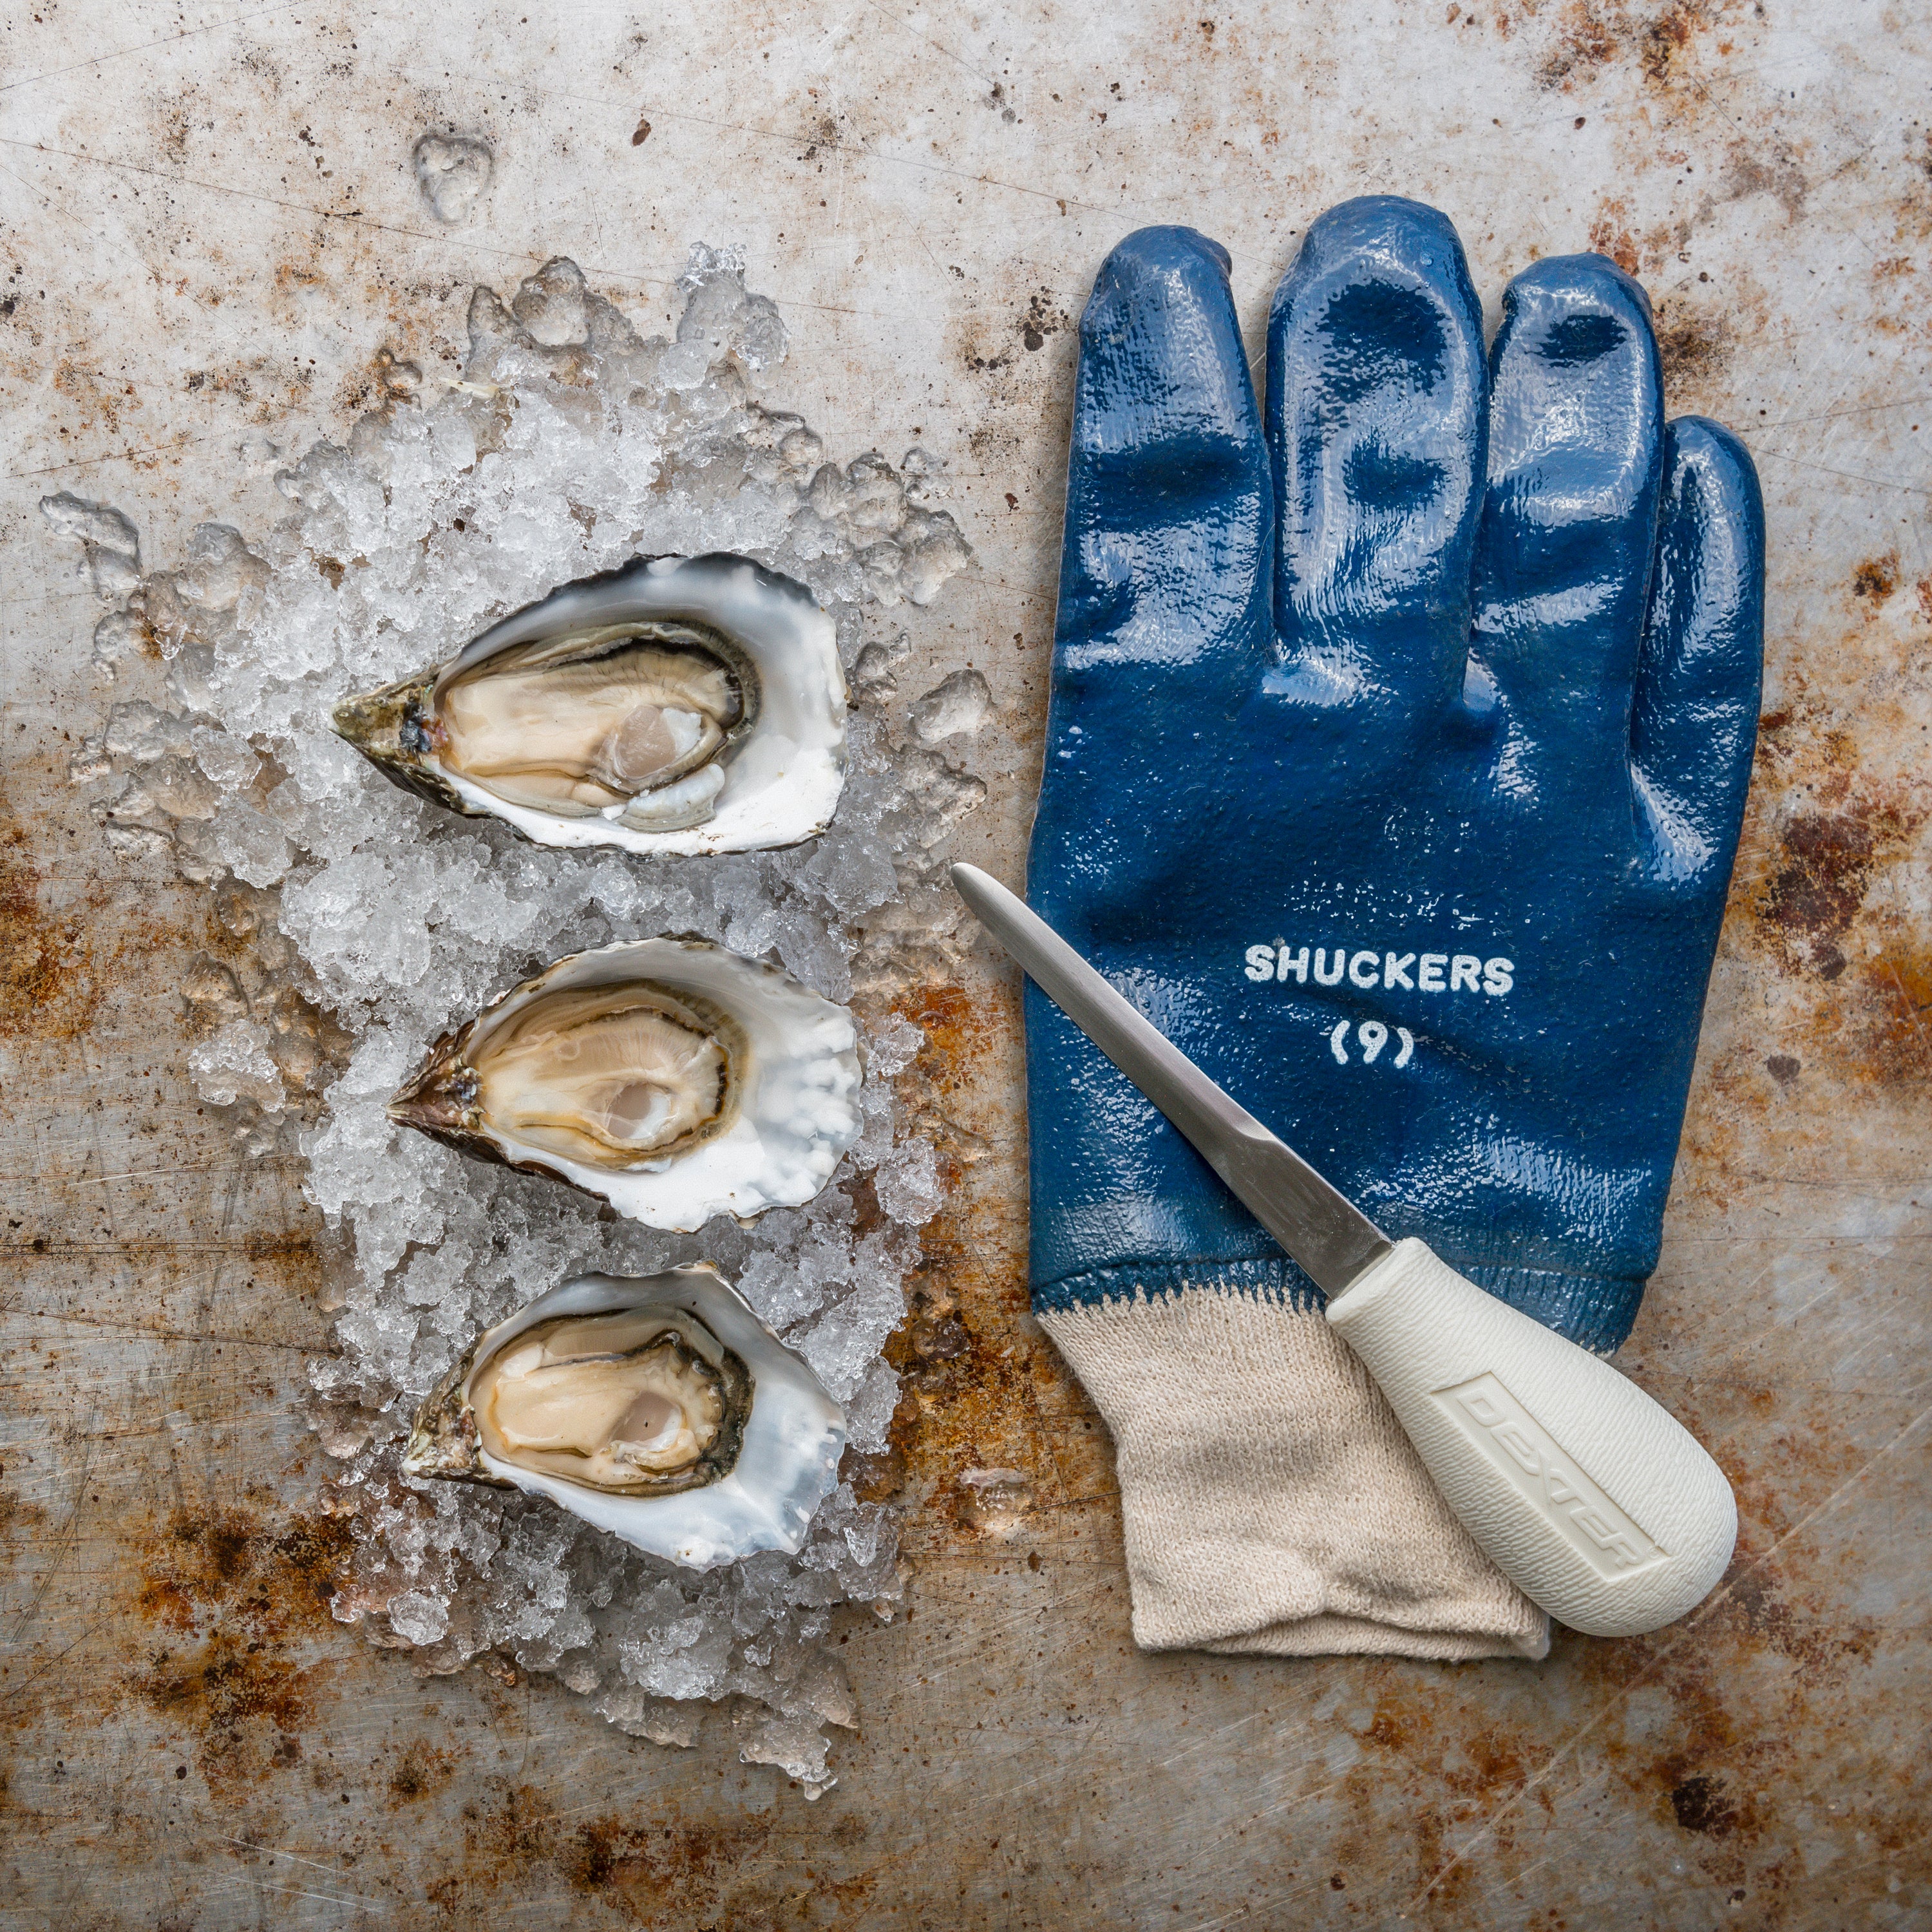 CLAM Fishing Gloves in Fishing Clothing 